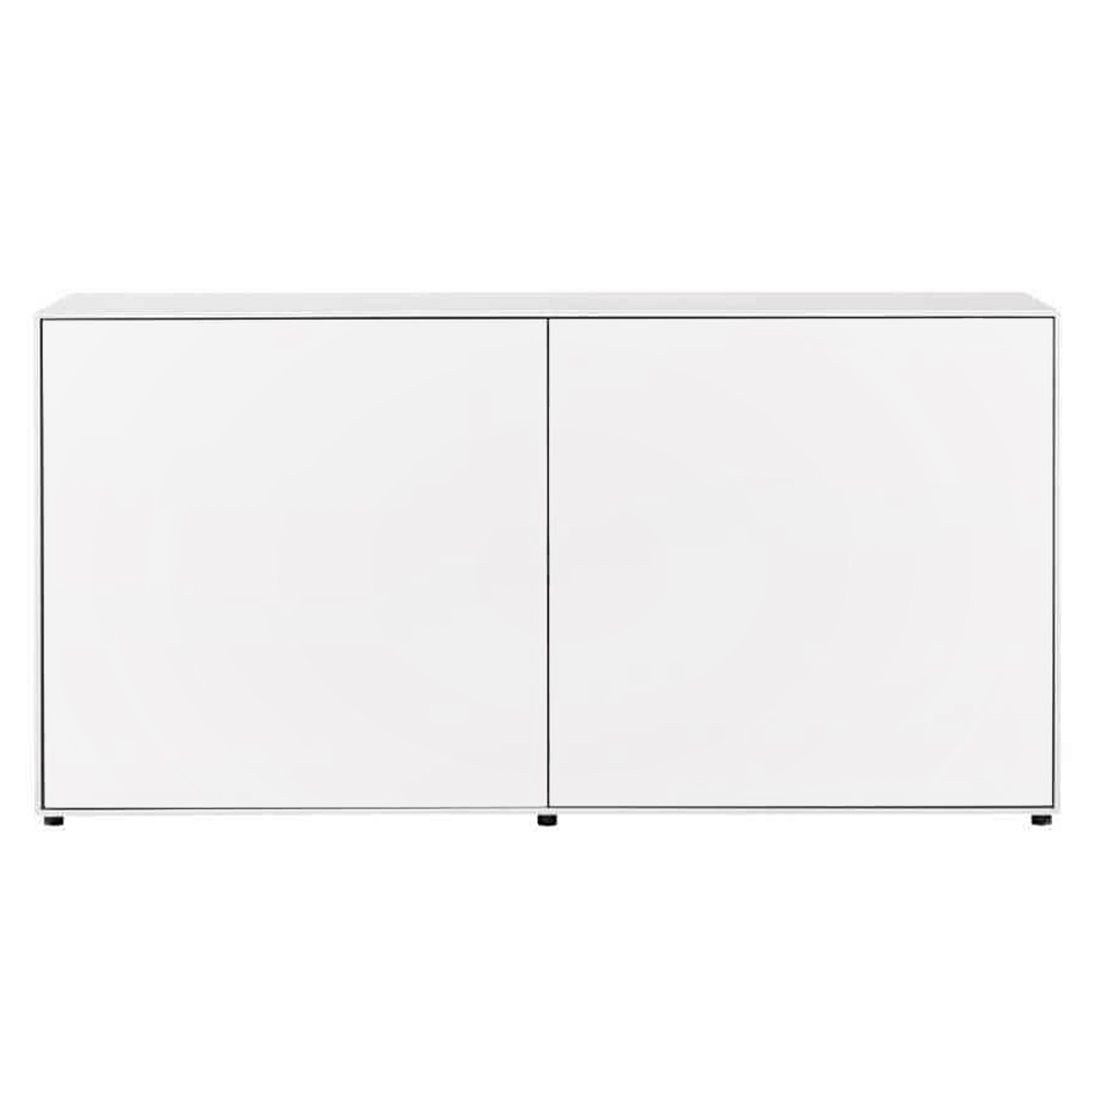 now! by hülsta now! easy Sideboard 128x44,8x64cm